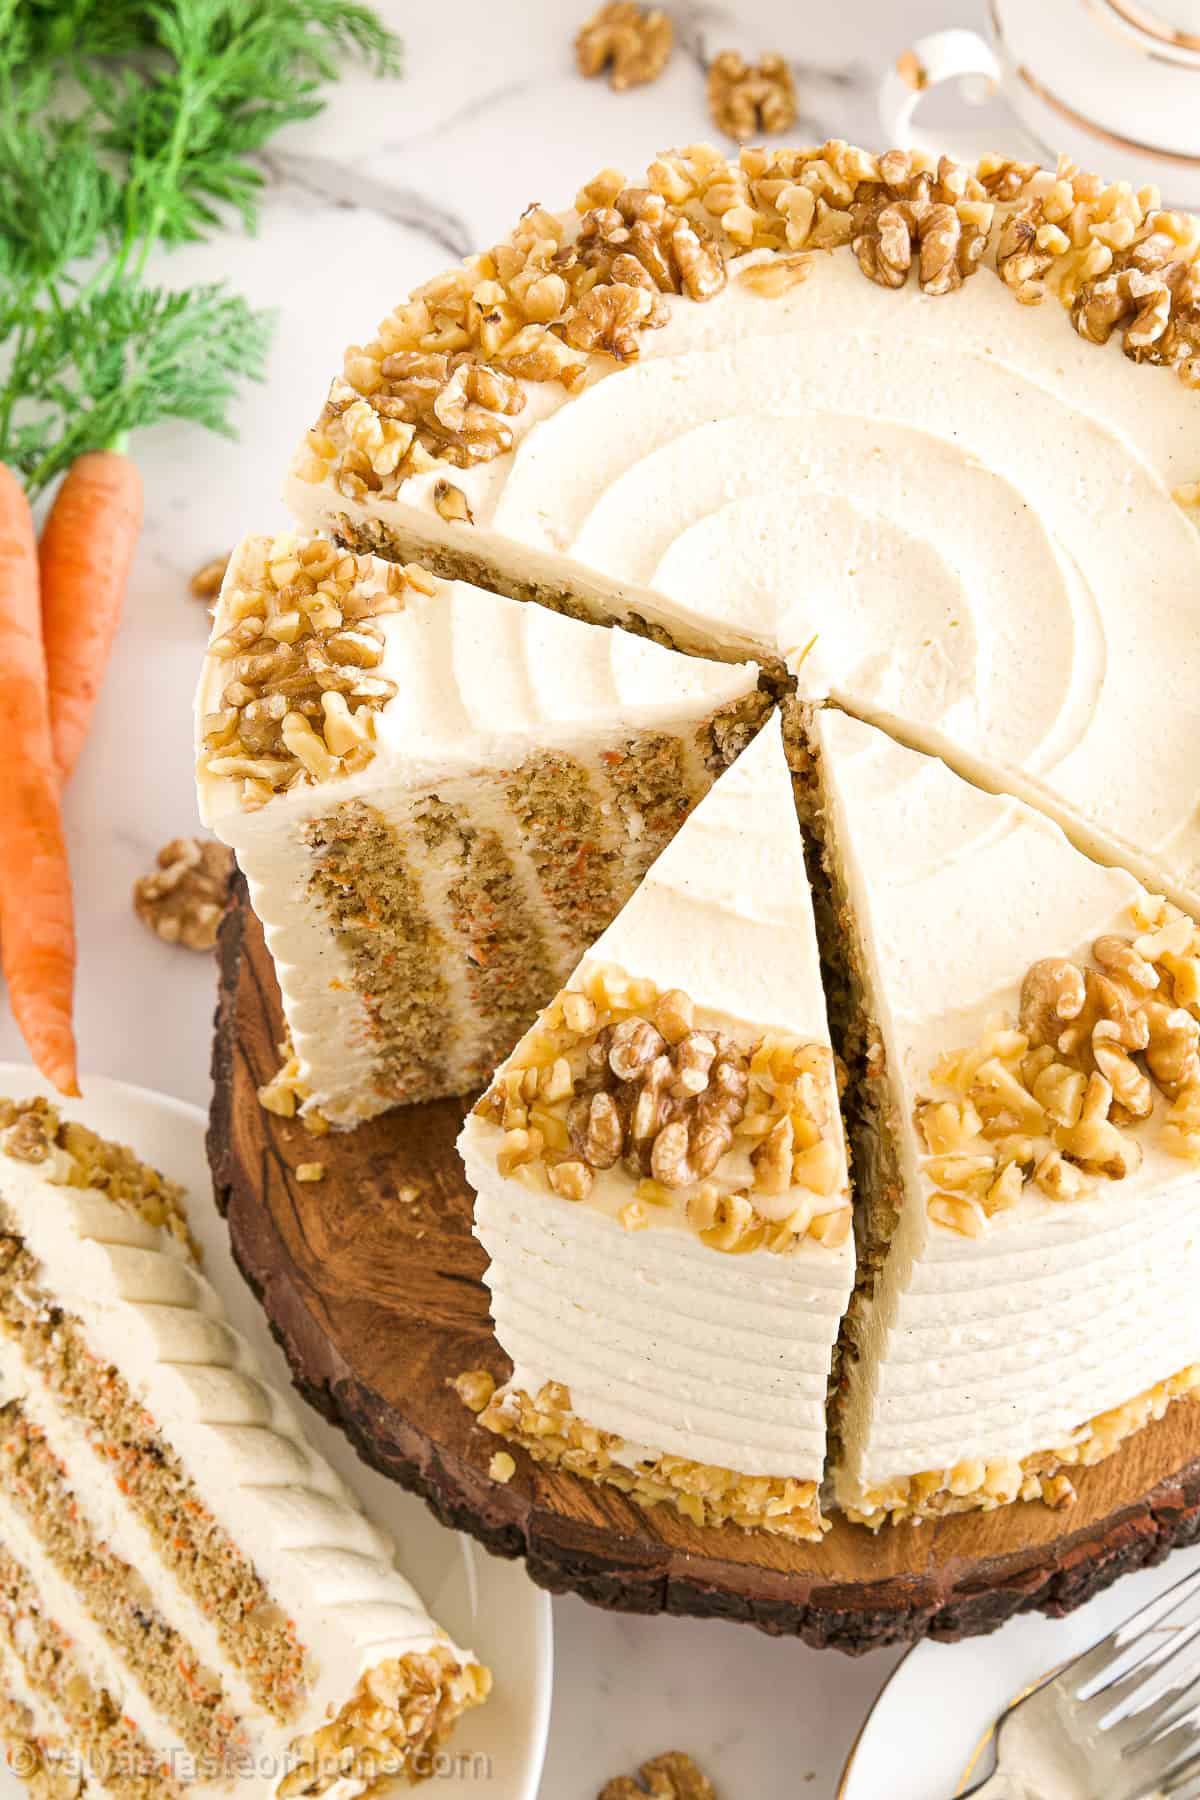 The cake layers are incredibly moist, not as high in calories as your store-bought cake, and super fluffy, with warming spices, loads of carrots, and no vegetable oil used making this cake absolutely irresistible!